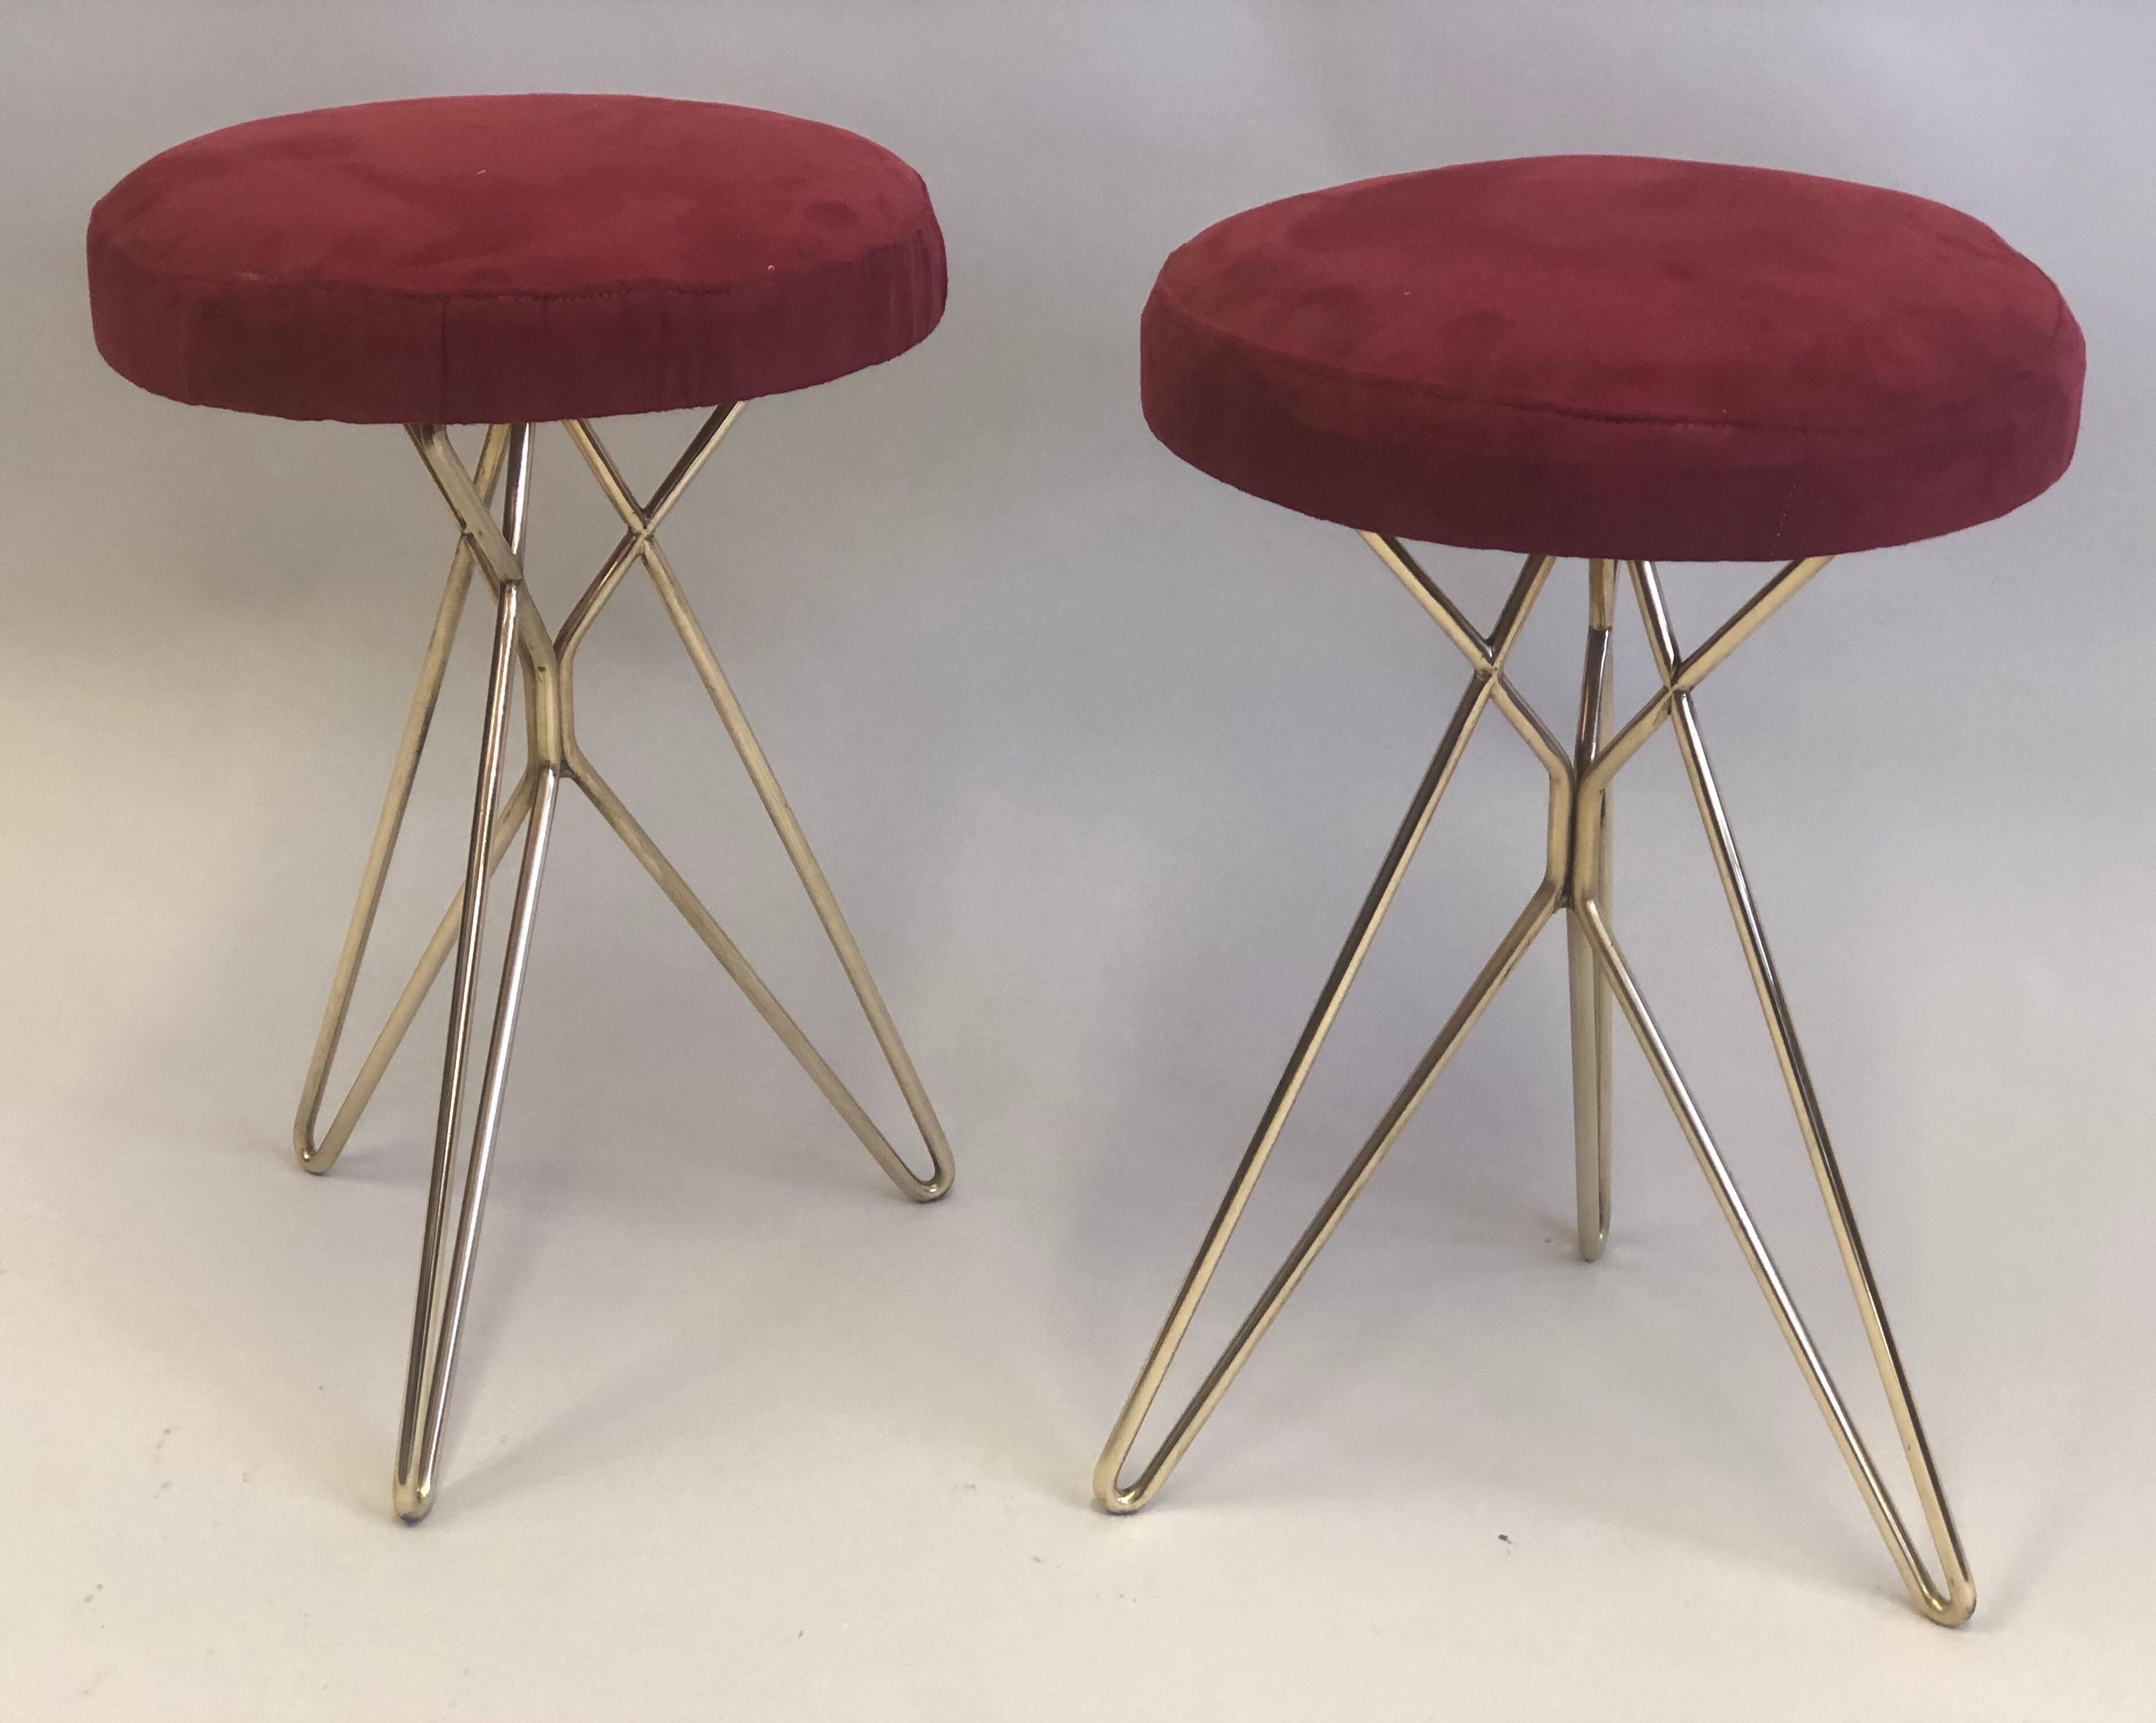 Pair of Italian Mid-Century Modern solid brass stools or vanity benches based on a prototype by Ico Parisi.

'The creation of these artisan made pieces from the workshop of Ariberto Colombo derives from the desire to use metal bars to create